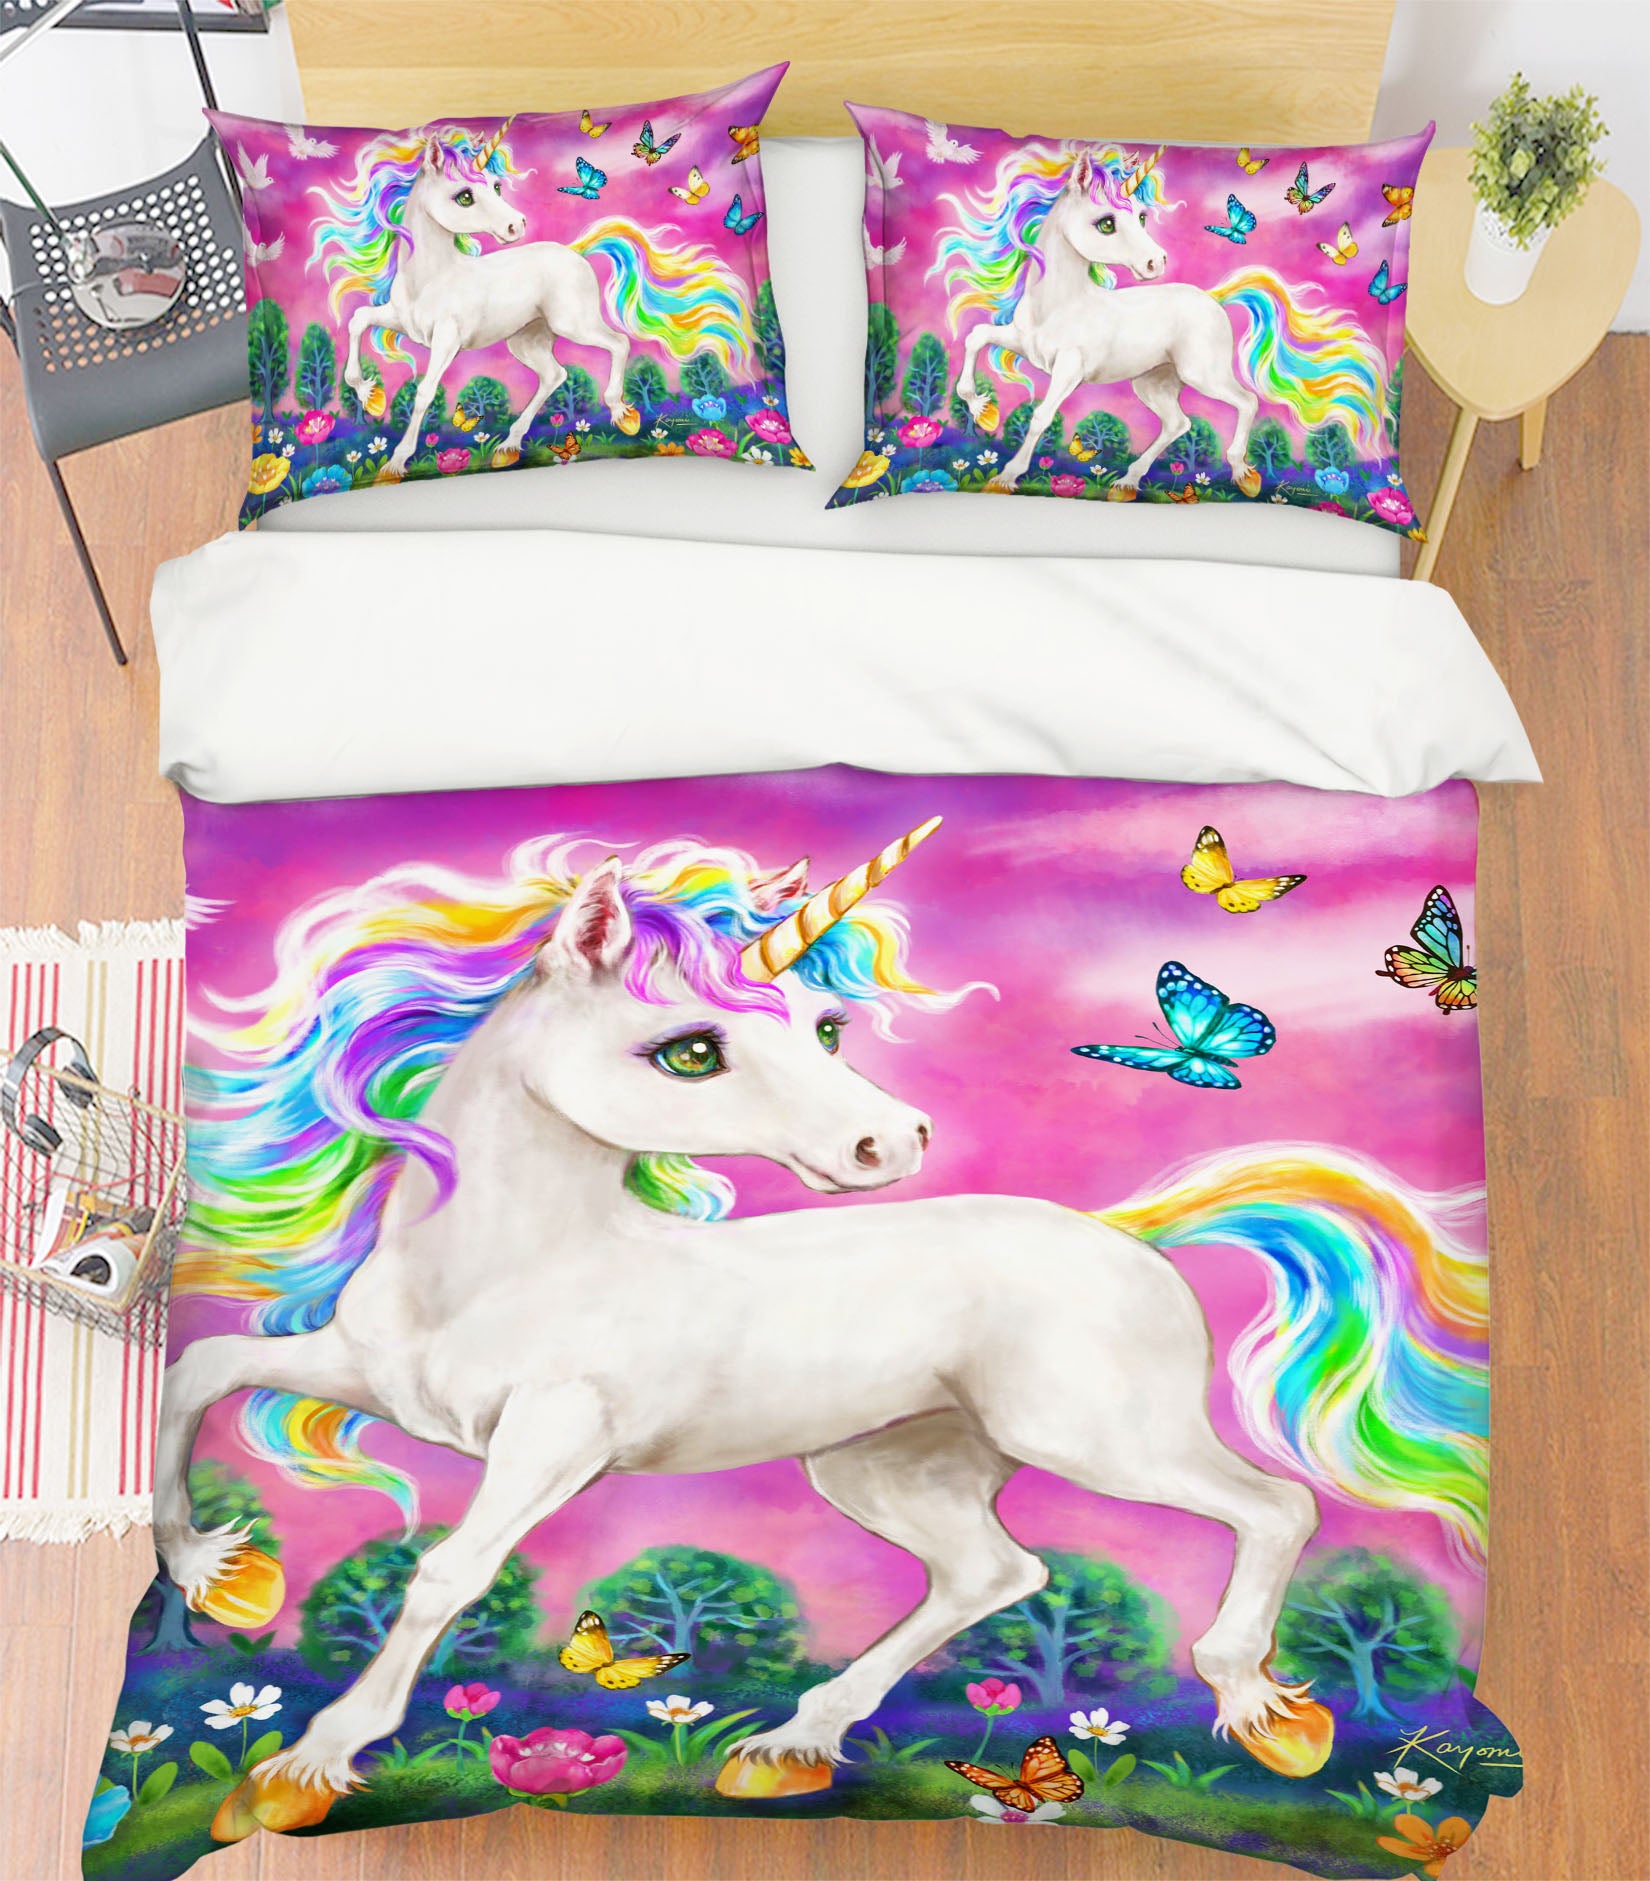 3D Unicorn Butterfly 5872 Kayomi Harai Bedding Bed Pillowcases Quilt Cover Duvet Cover